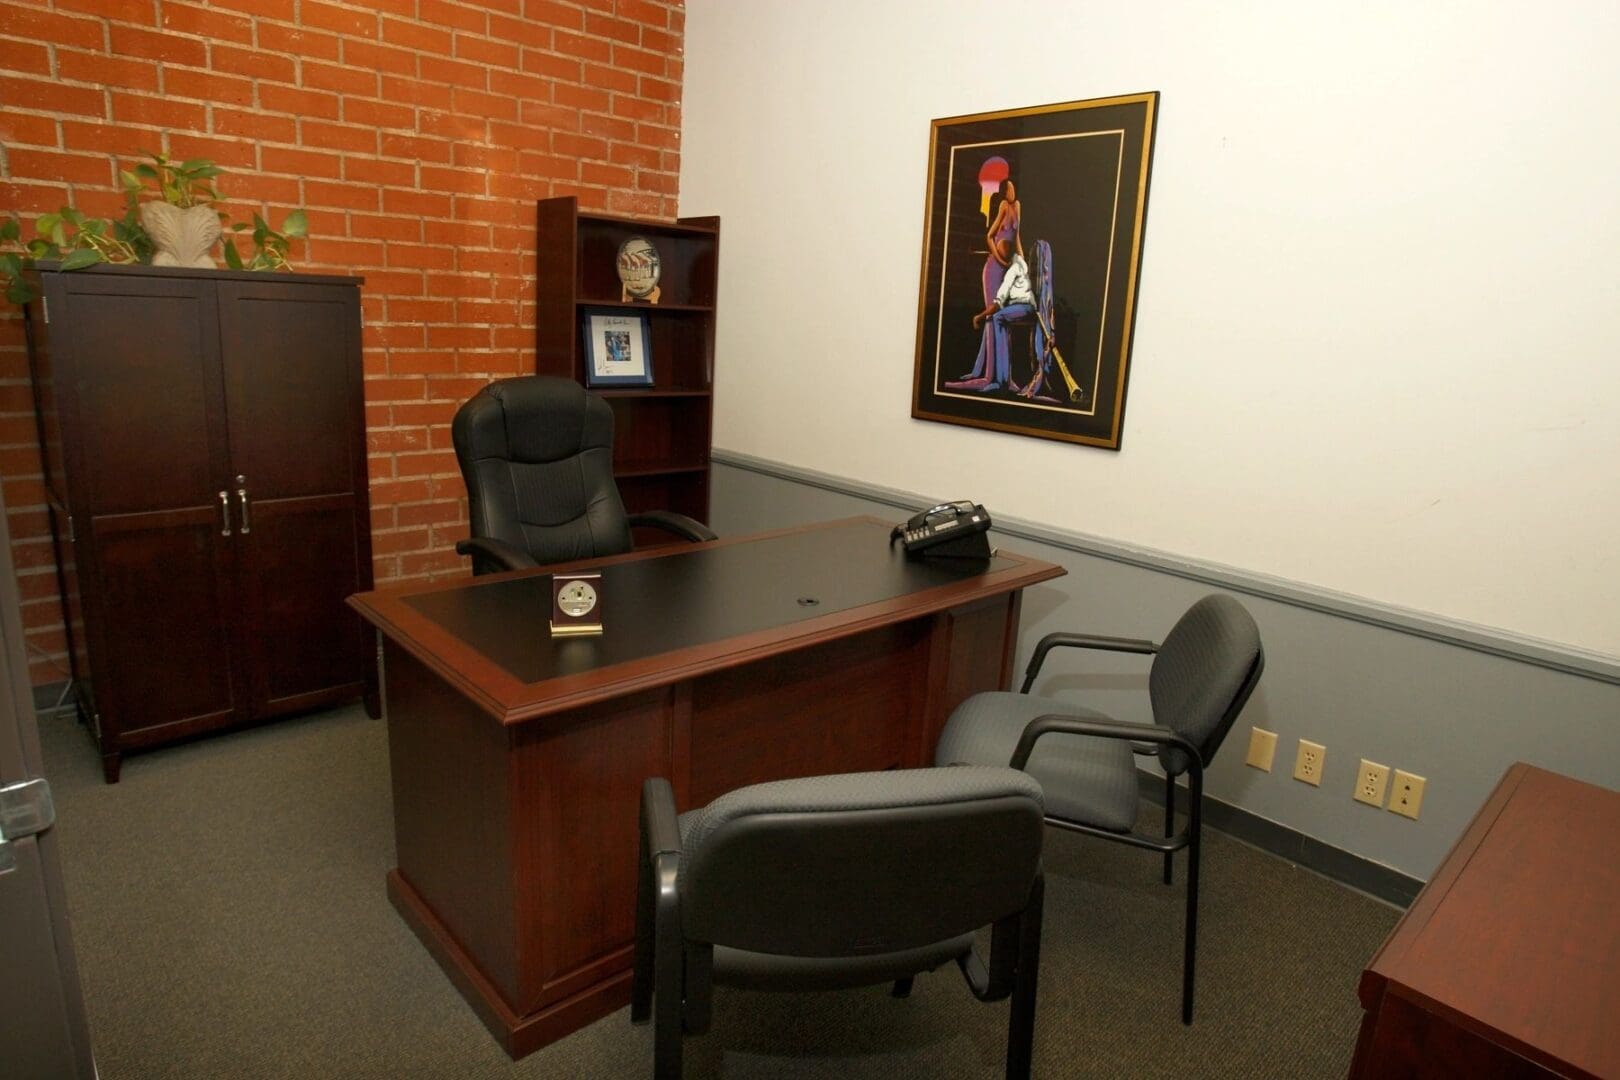 A room with chairs, desk and picture on the wall.